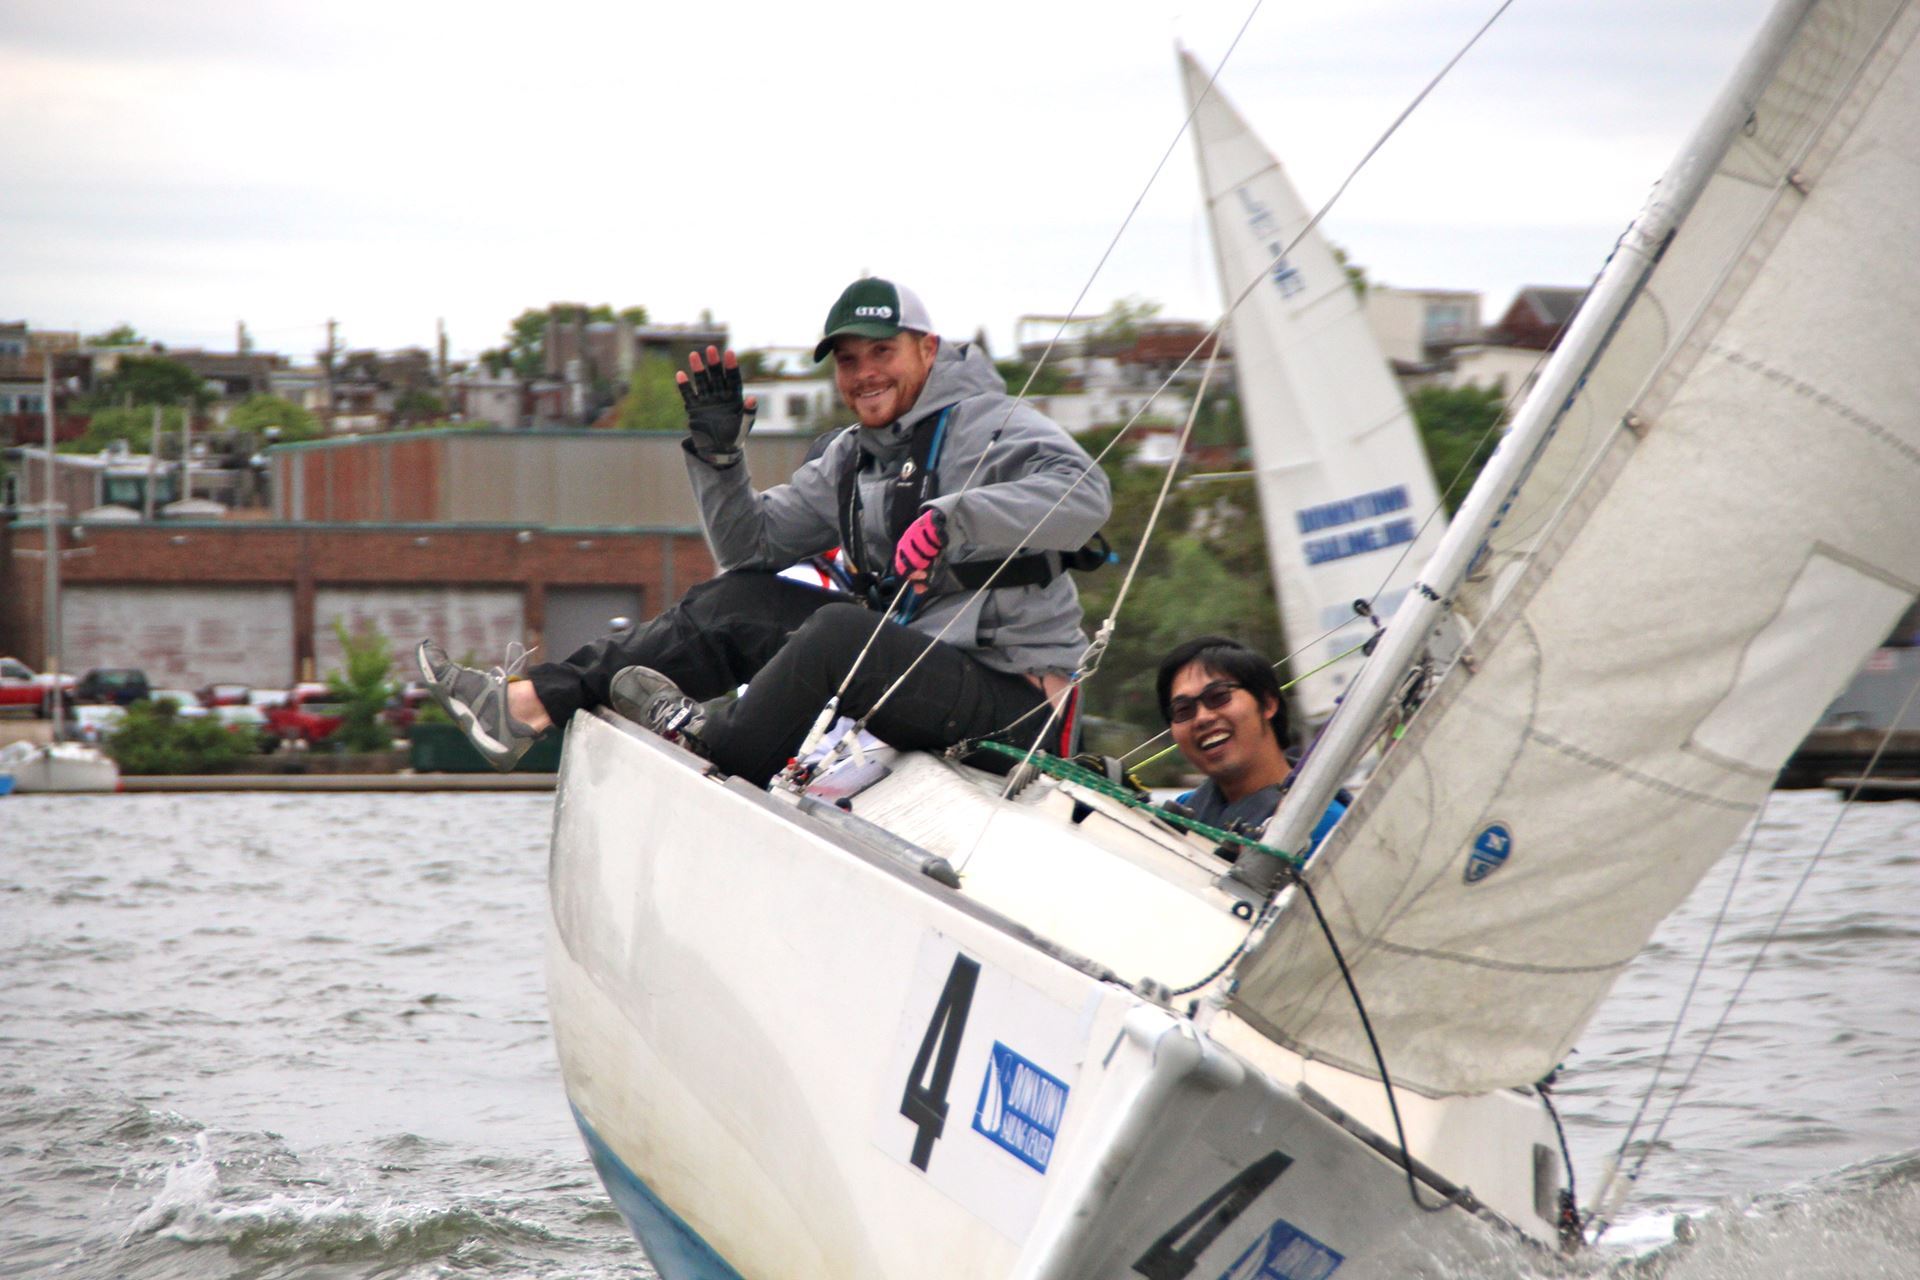 DSC sailors heel a J/22 on their way to the racecourse